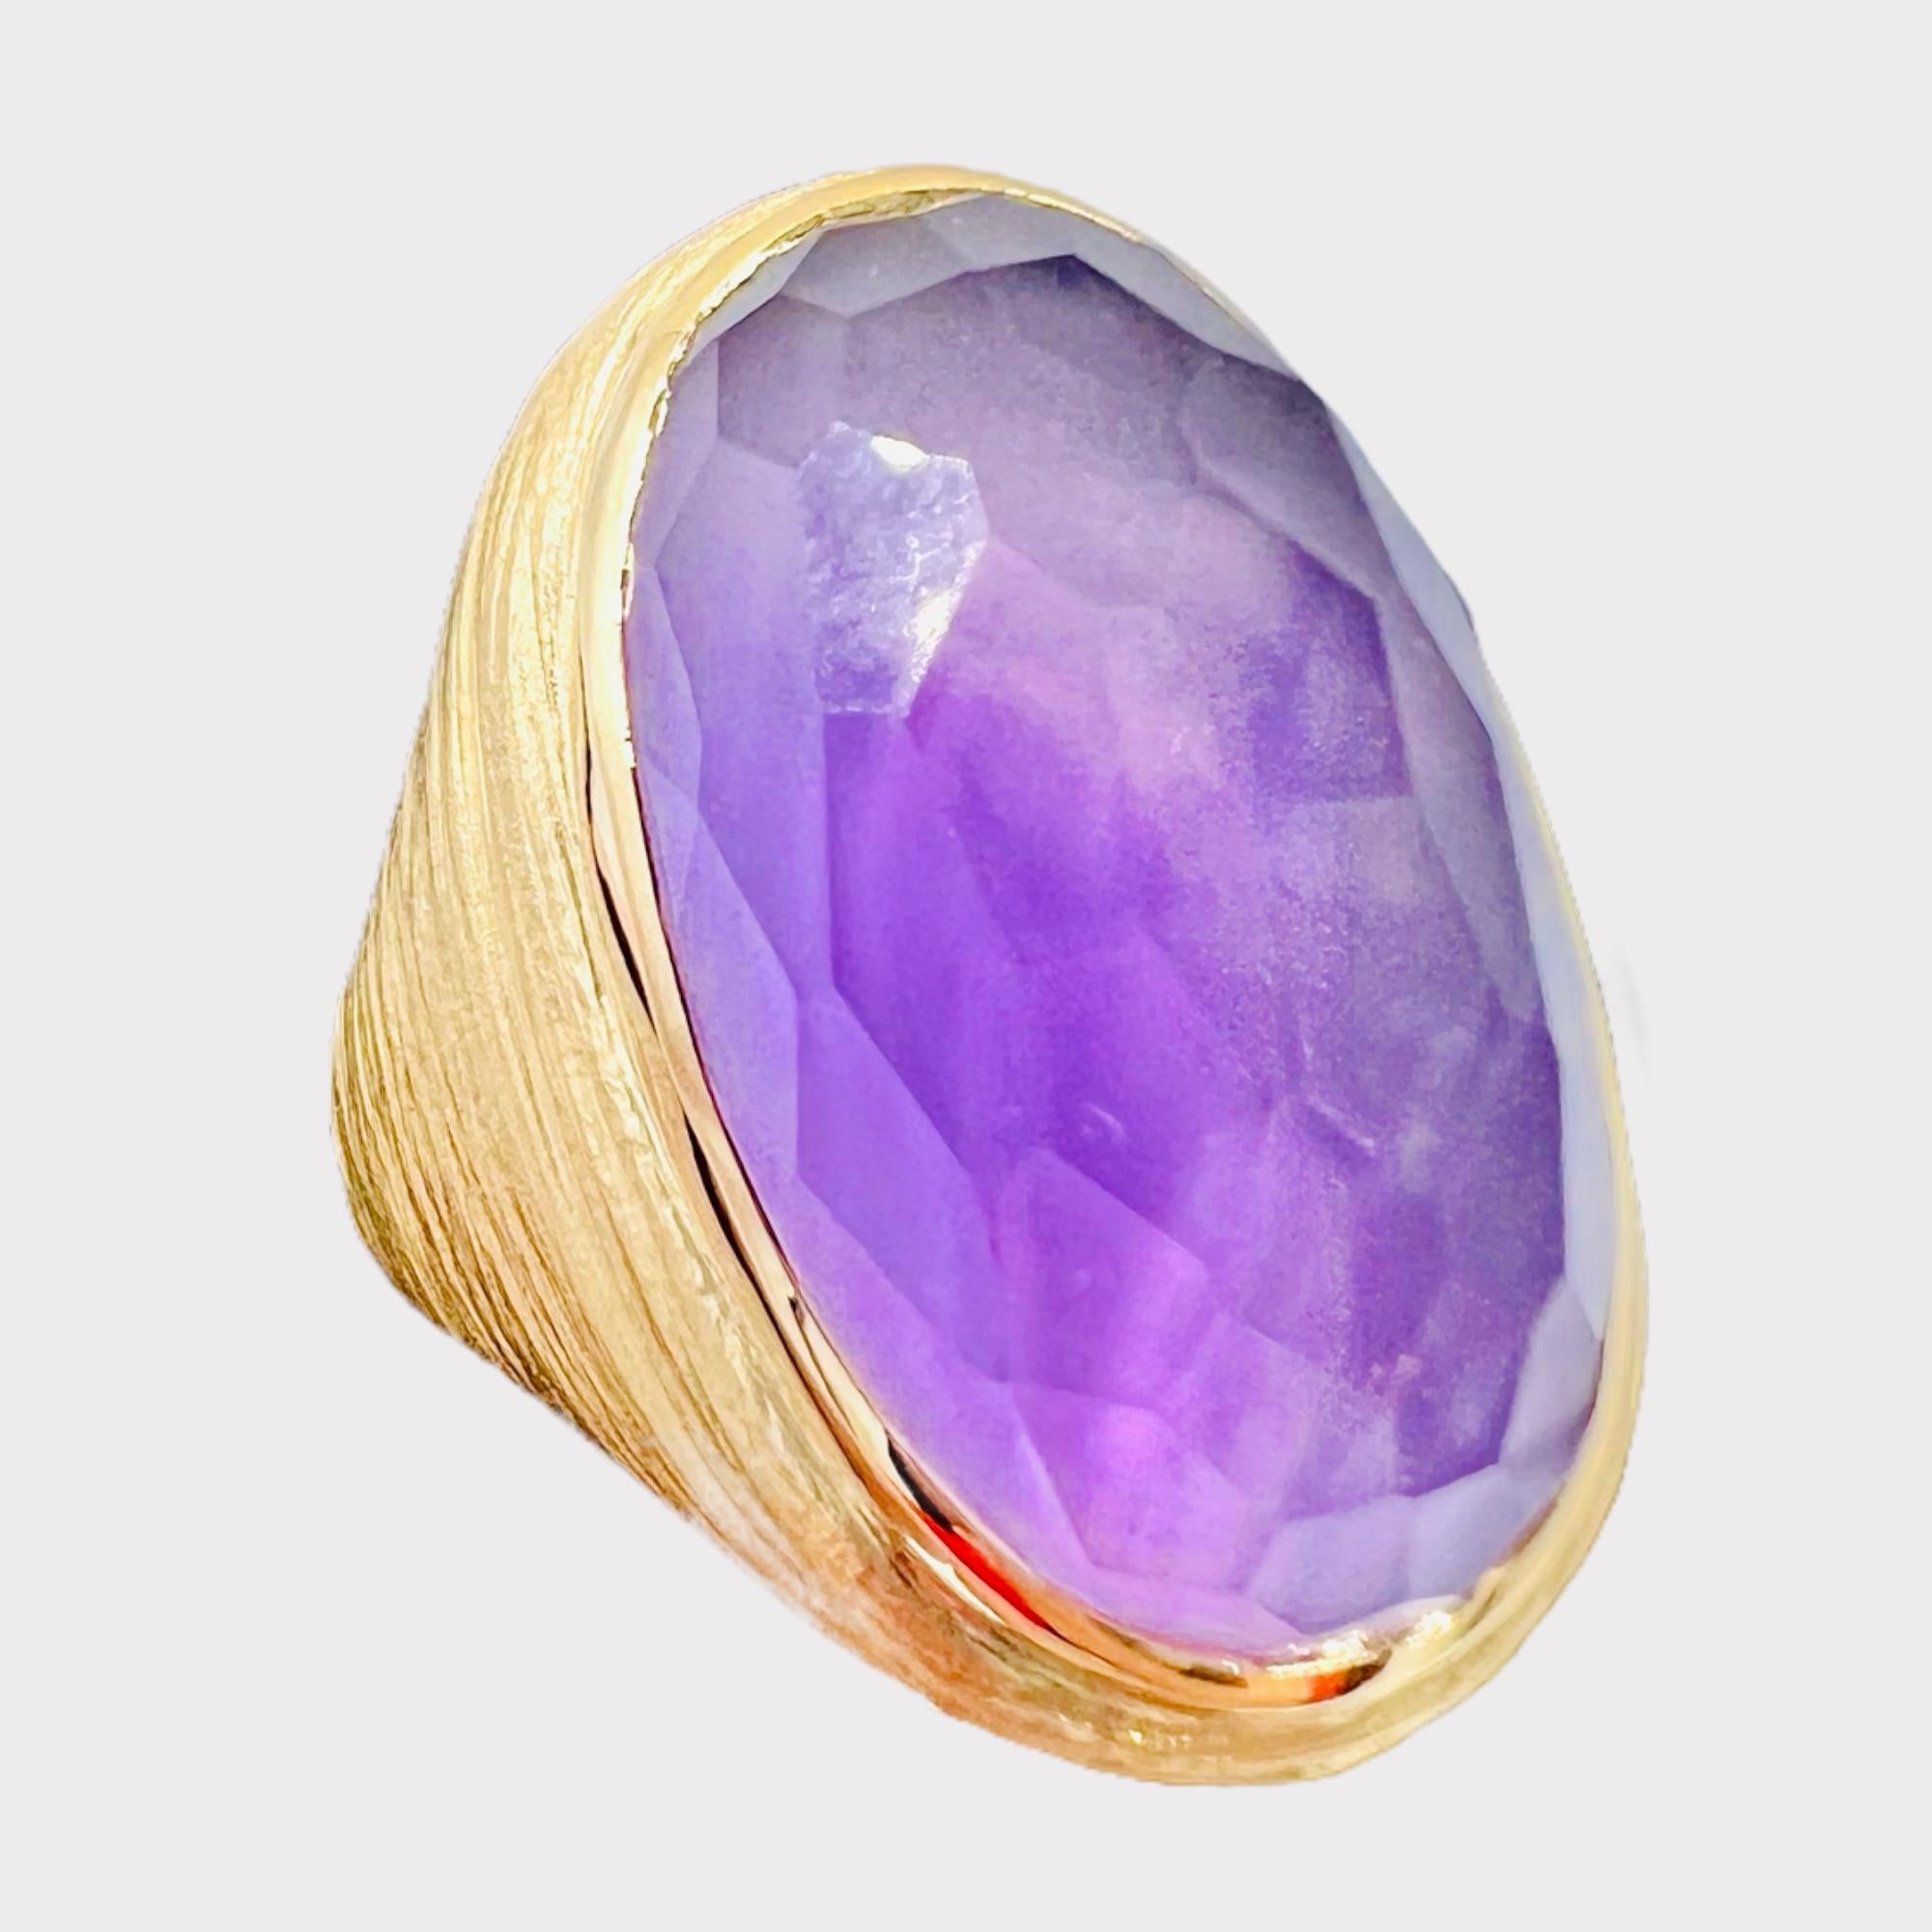 Important 18 Carat Gold Ring Set with a Faceted Amethyst 2